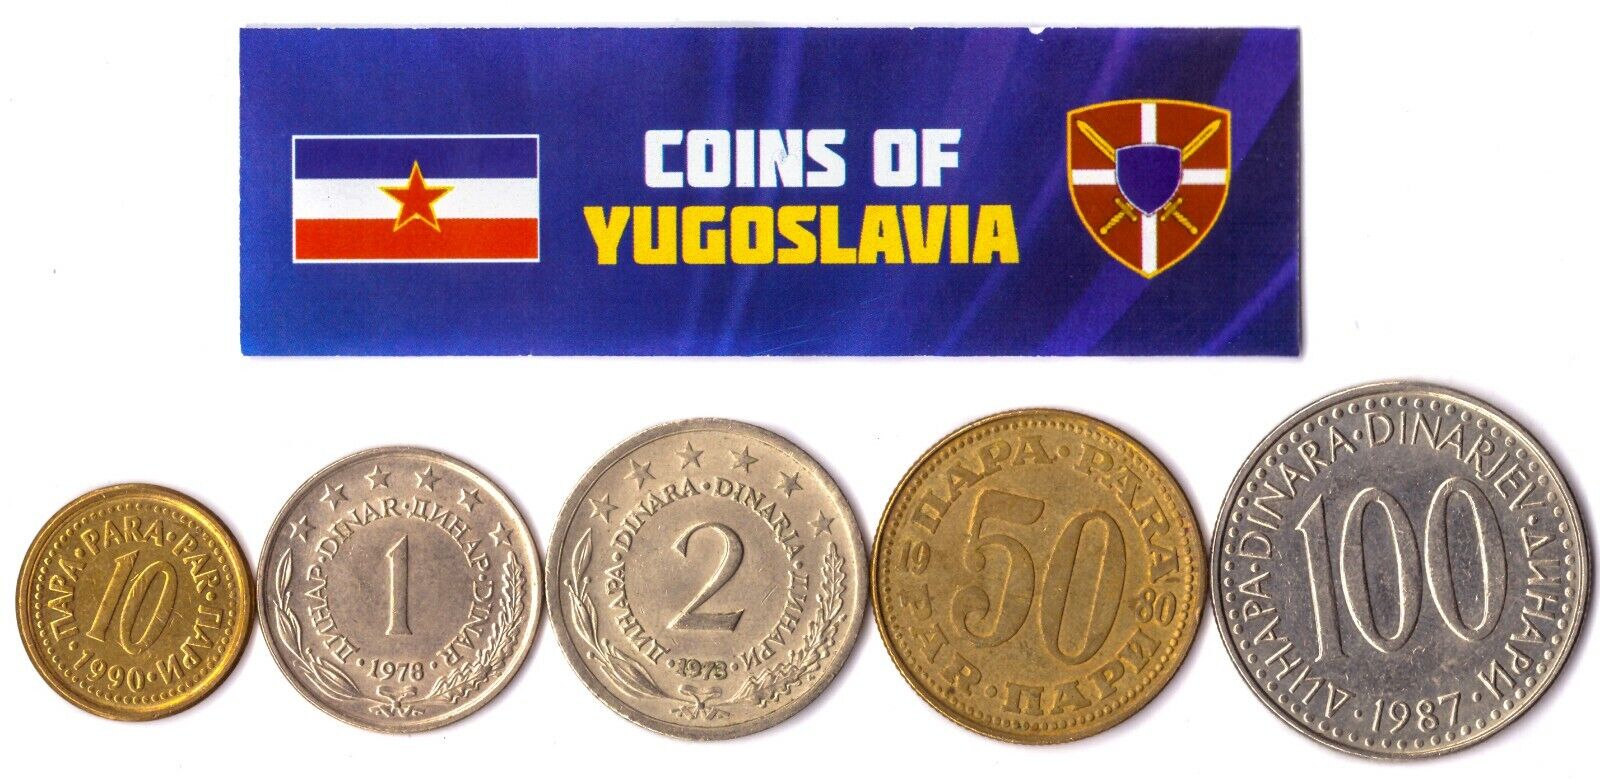 5 YUGOSLAV COINS. EXTINCT COUNTRY IN EUROPE. JUGOSLAVIA COINS FOREIGN CURRENCY Без бренда - фотография #2